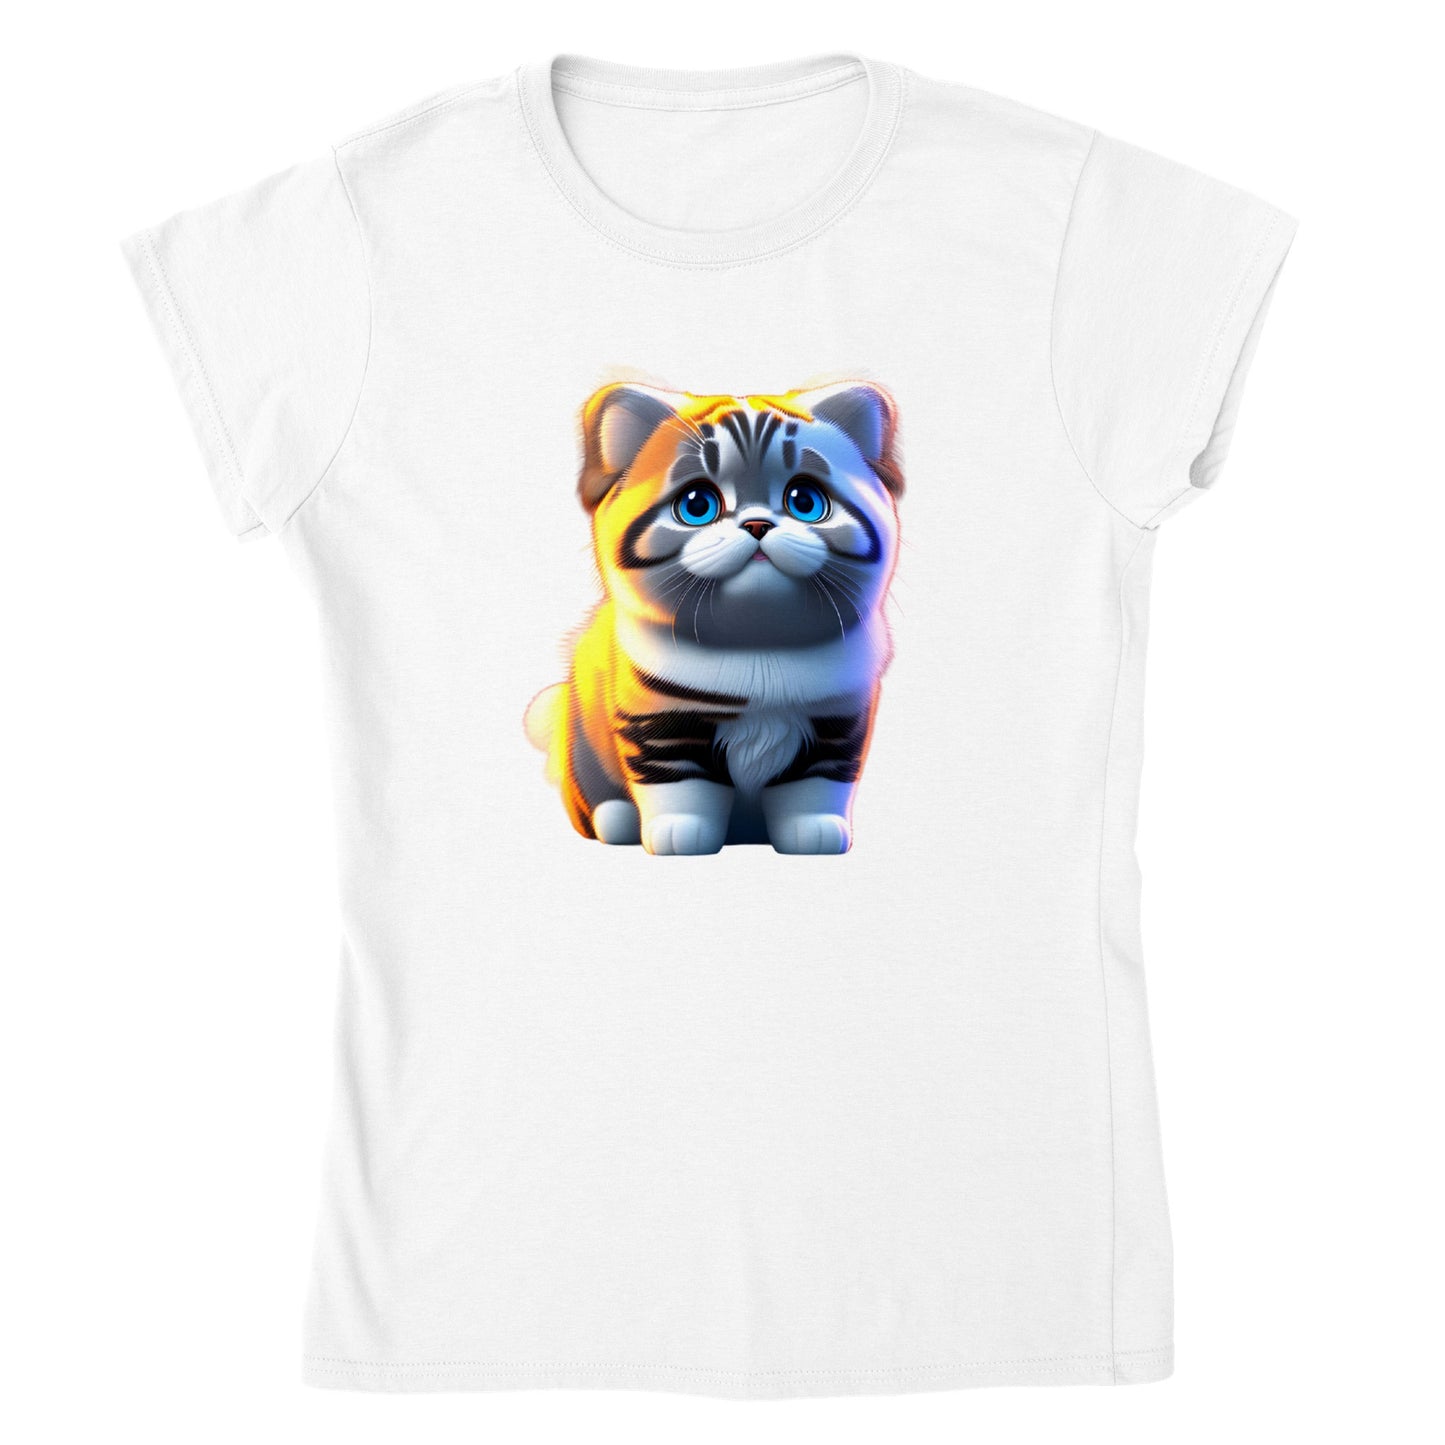 Adorable, Cool, Cute Cats and Kittens Toy - Classic Women’s Crewneck T-Shirt 44